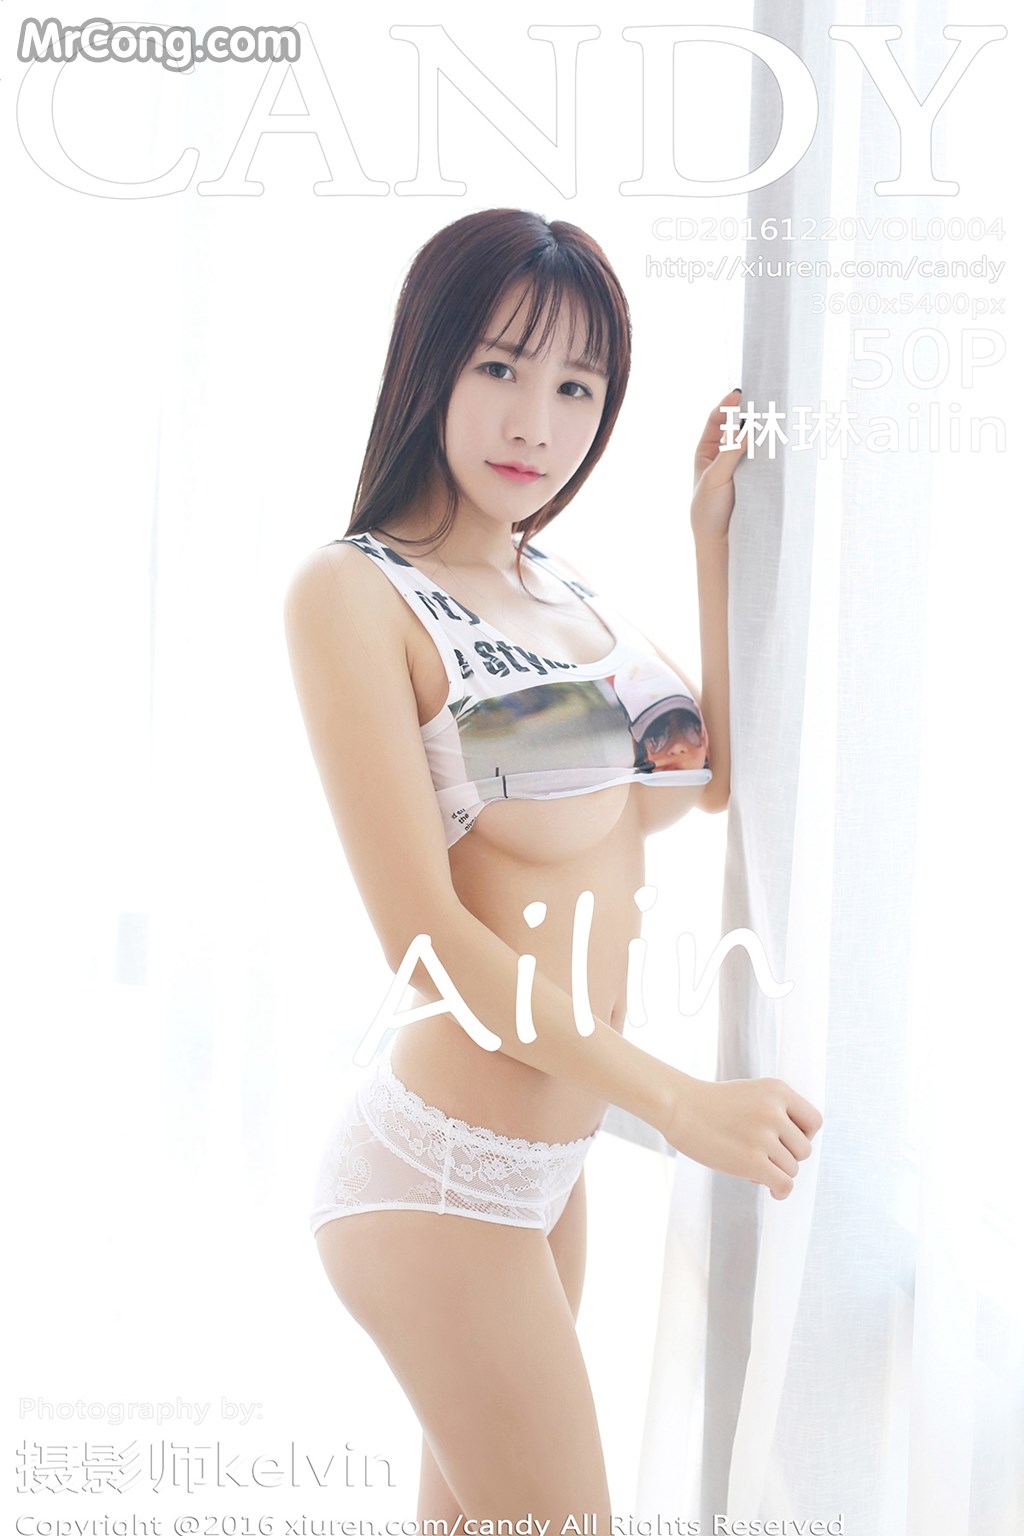 CANDY Vol. 2004: Ailin Model (琳琳) (51 pictures)